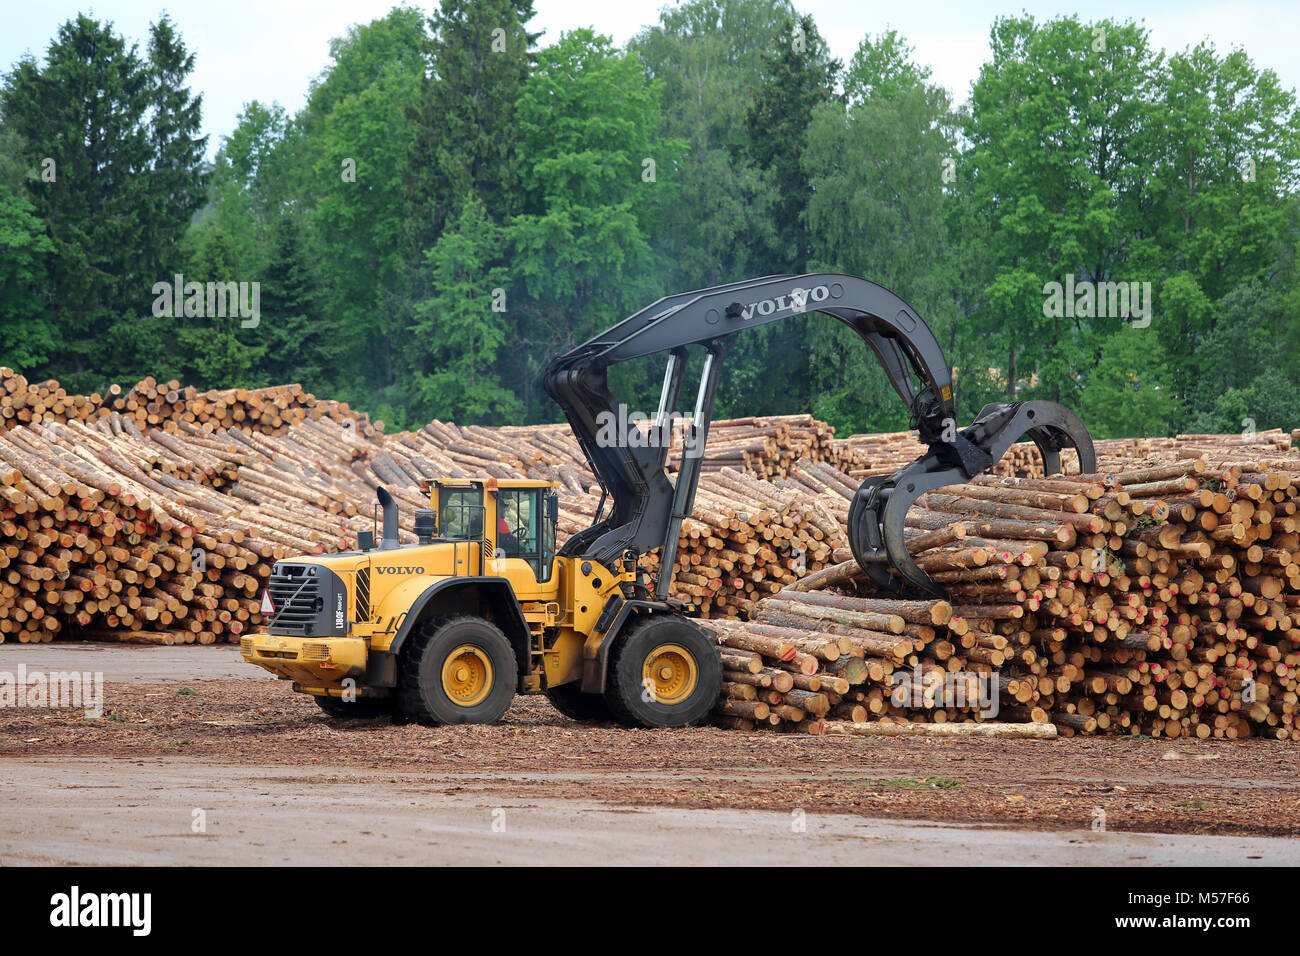 KYRO, FINLAND - JUNE 7, 2014: Volvo L180F High Lift wheel loader working at sawmill lumber yard.  The arm is capable of reaching a lift height of 5.8  Stock Photo